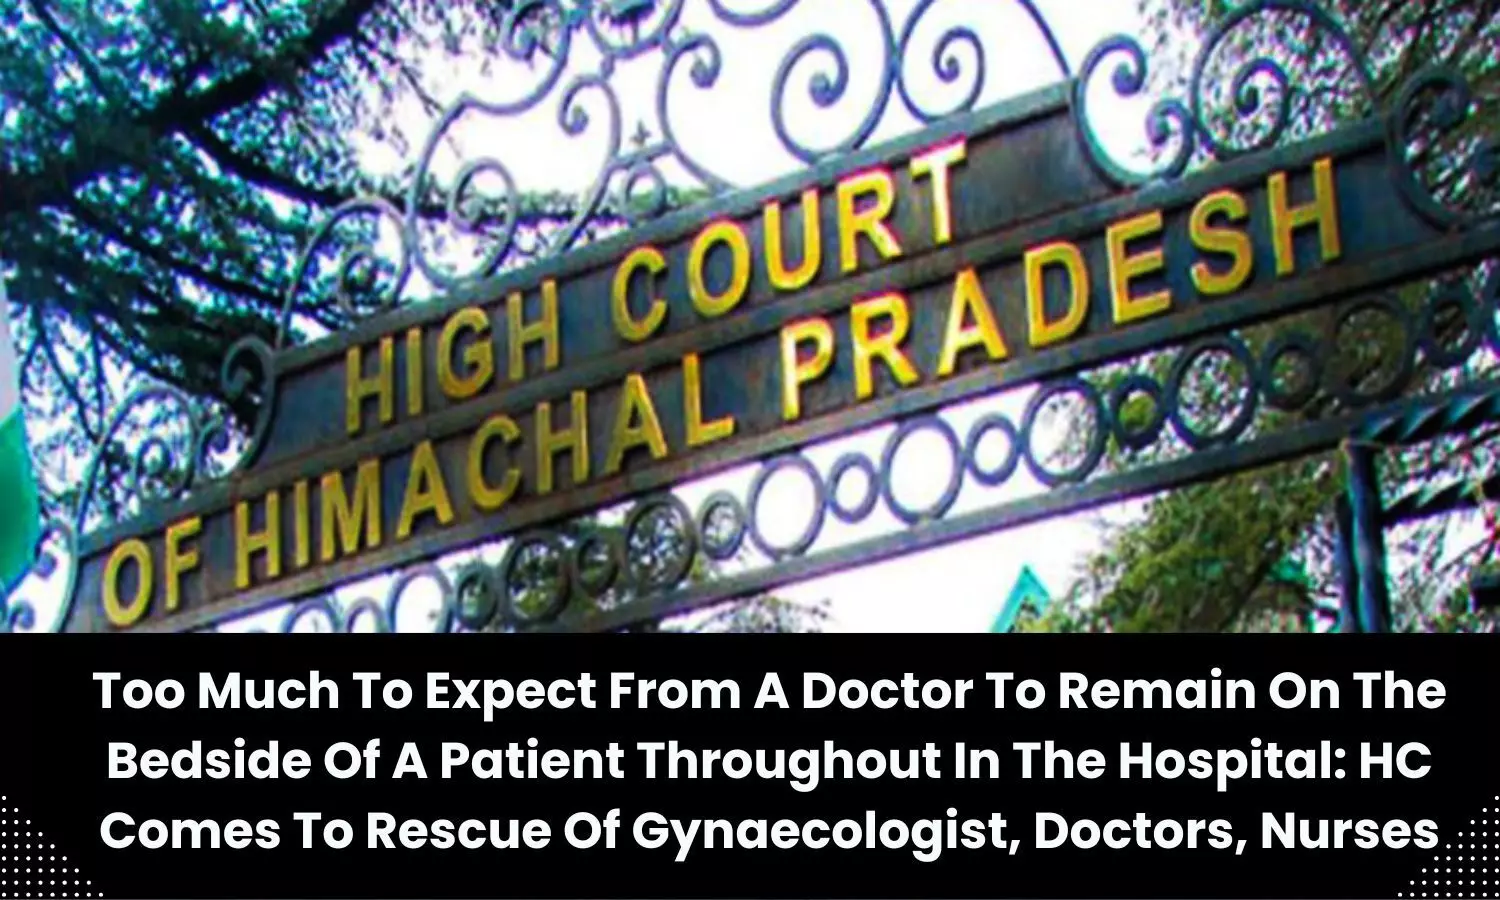 Too much to expect from a doctor to remain on the bedside of a patient throughout in the hospital: HC comes to rescue of gynaecologist, doctors, nurses